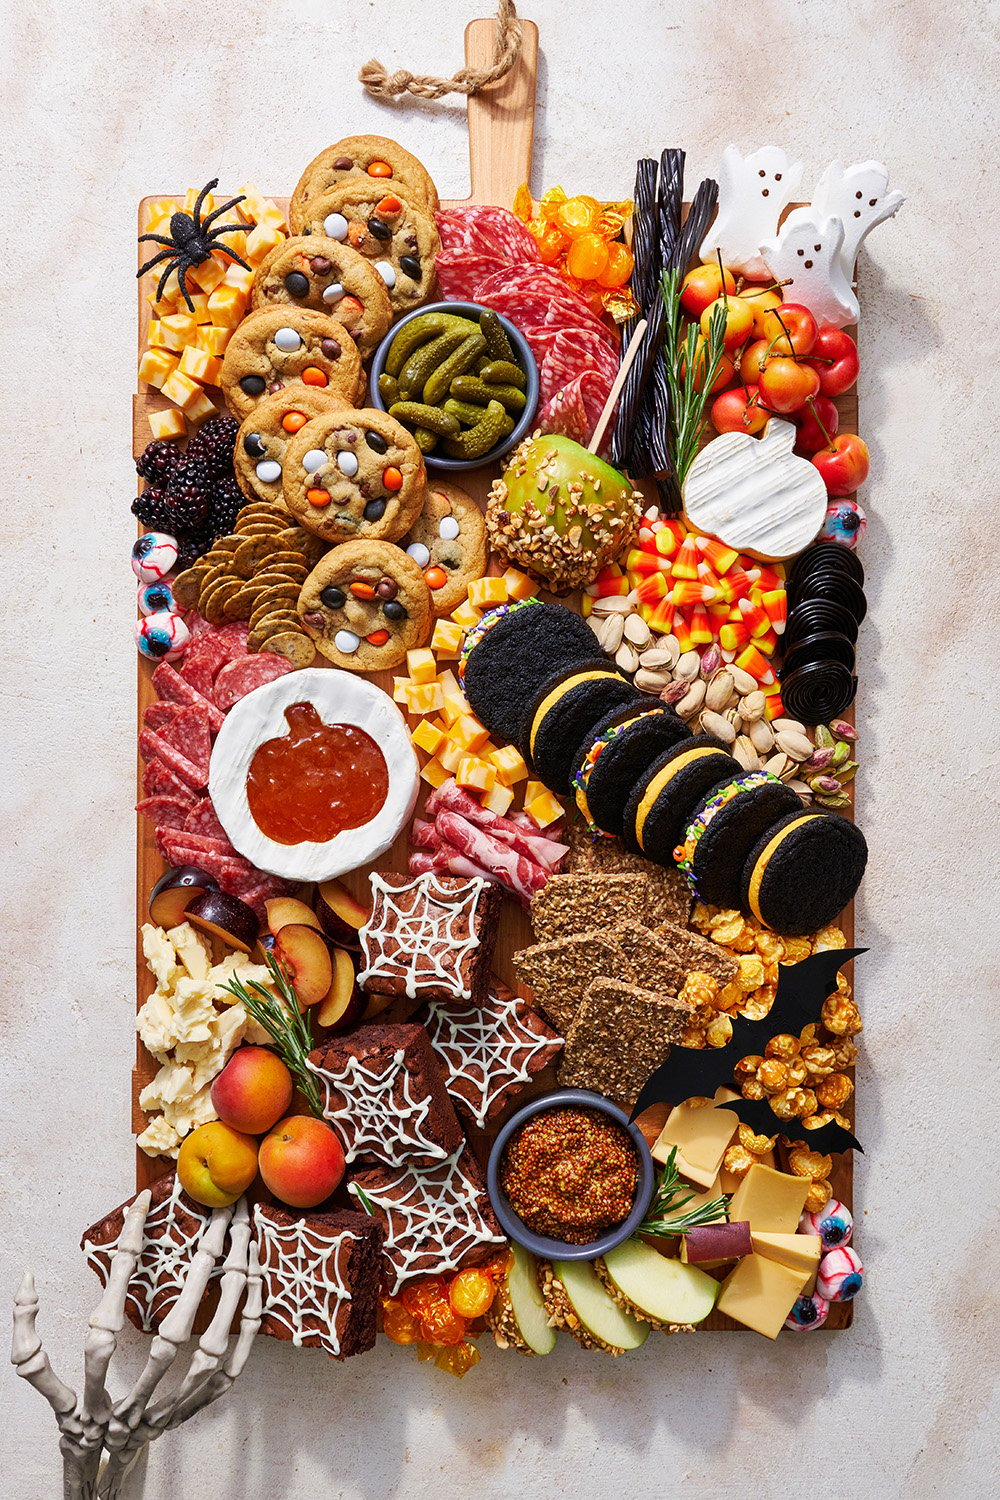 Halloween Charcuterie Board, filled with lots of sweet and savory snacking items